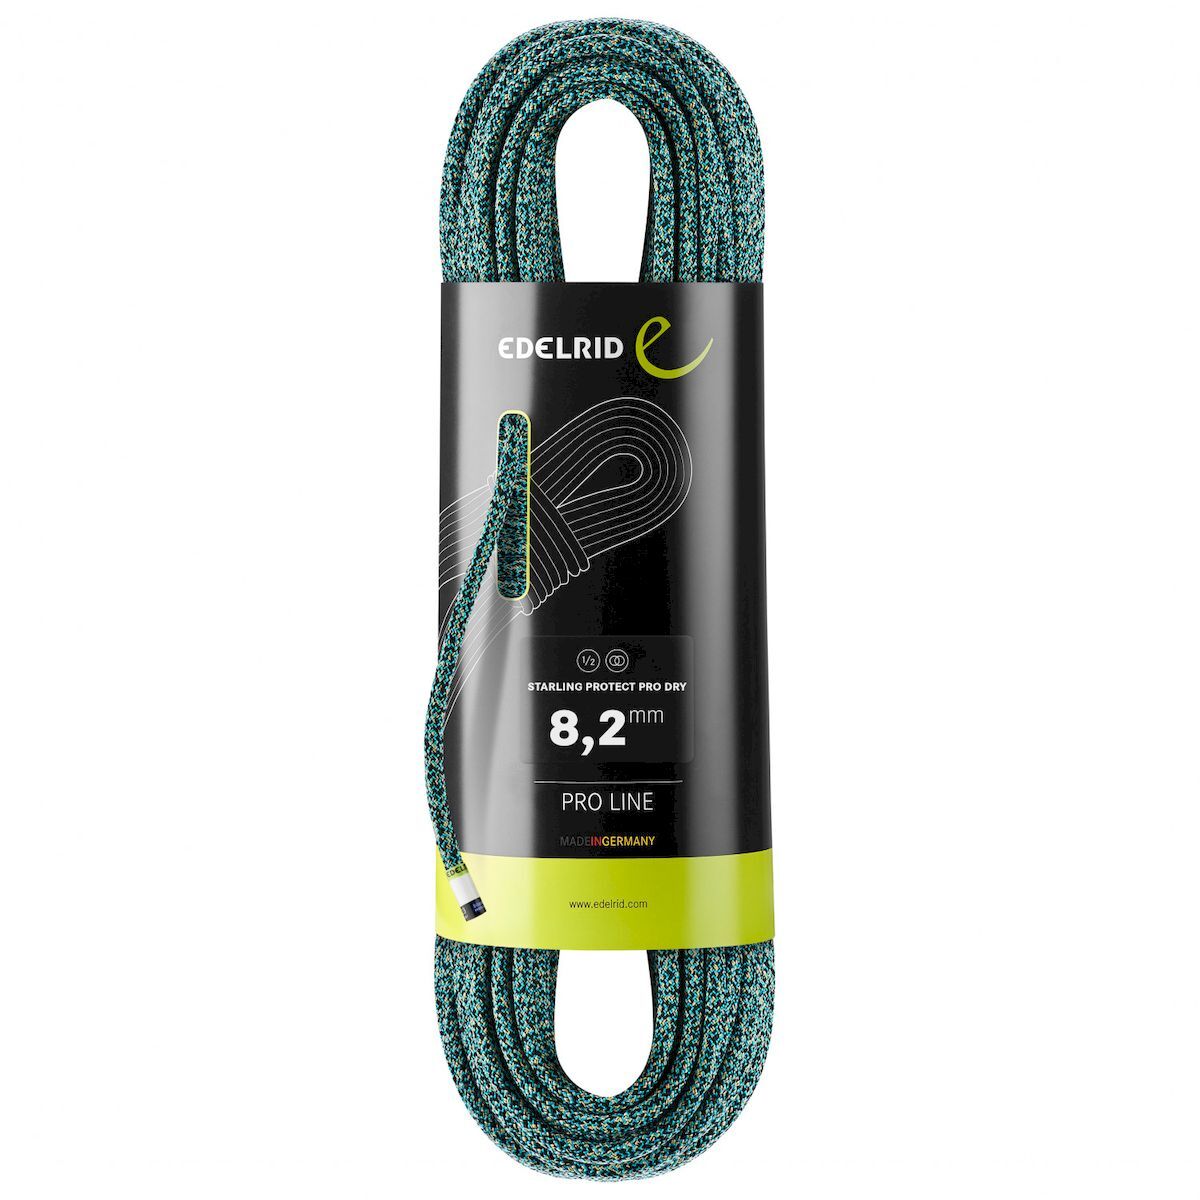 Edelrid Starling Protect Pro Dry 8,2 mm - Half rope